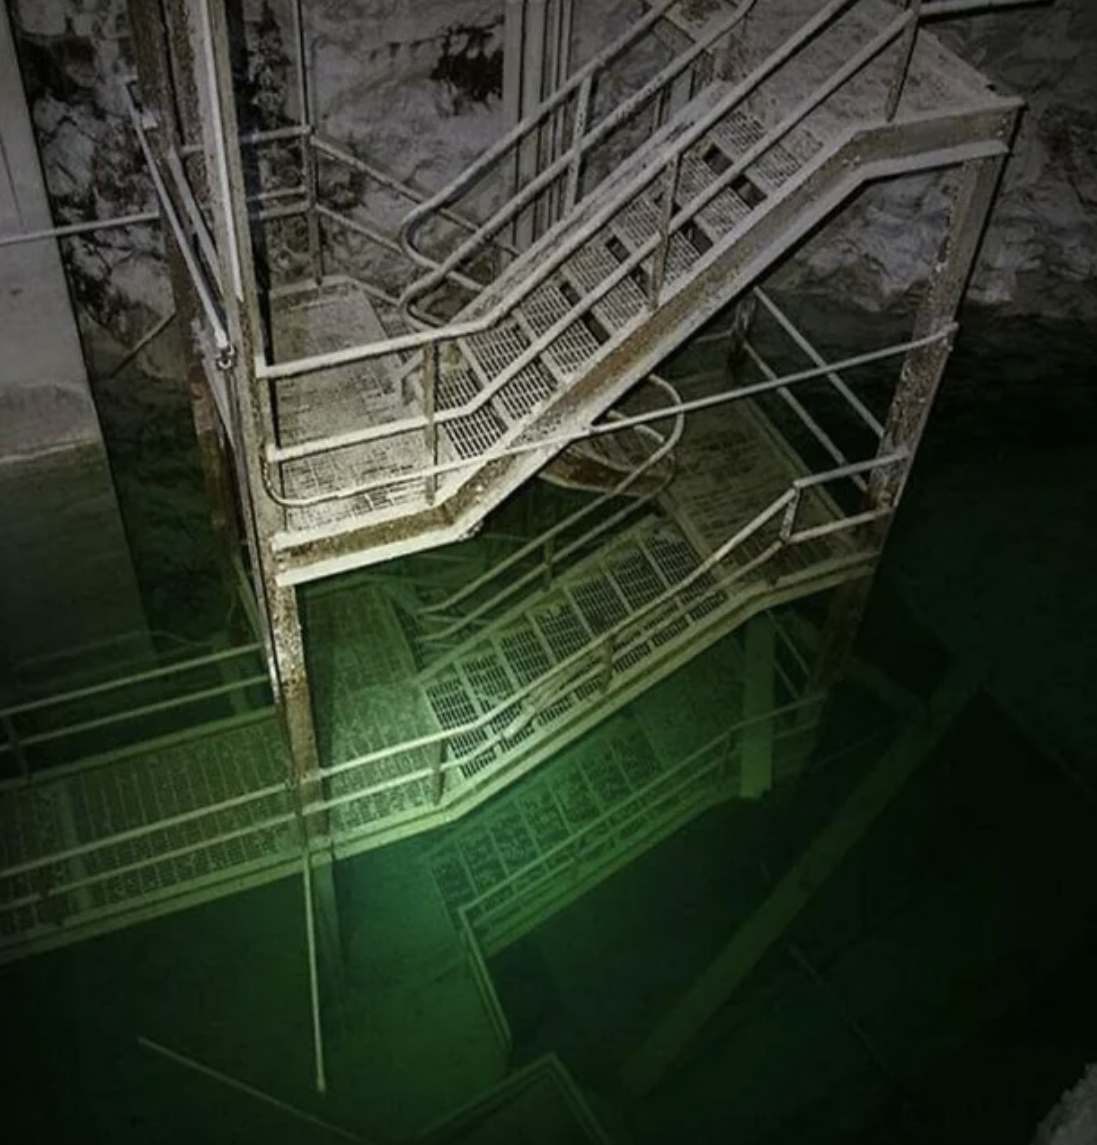 scary water - submechanophobia stairs